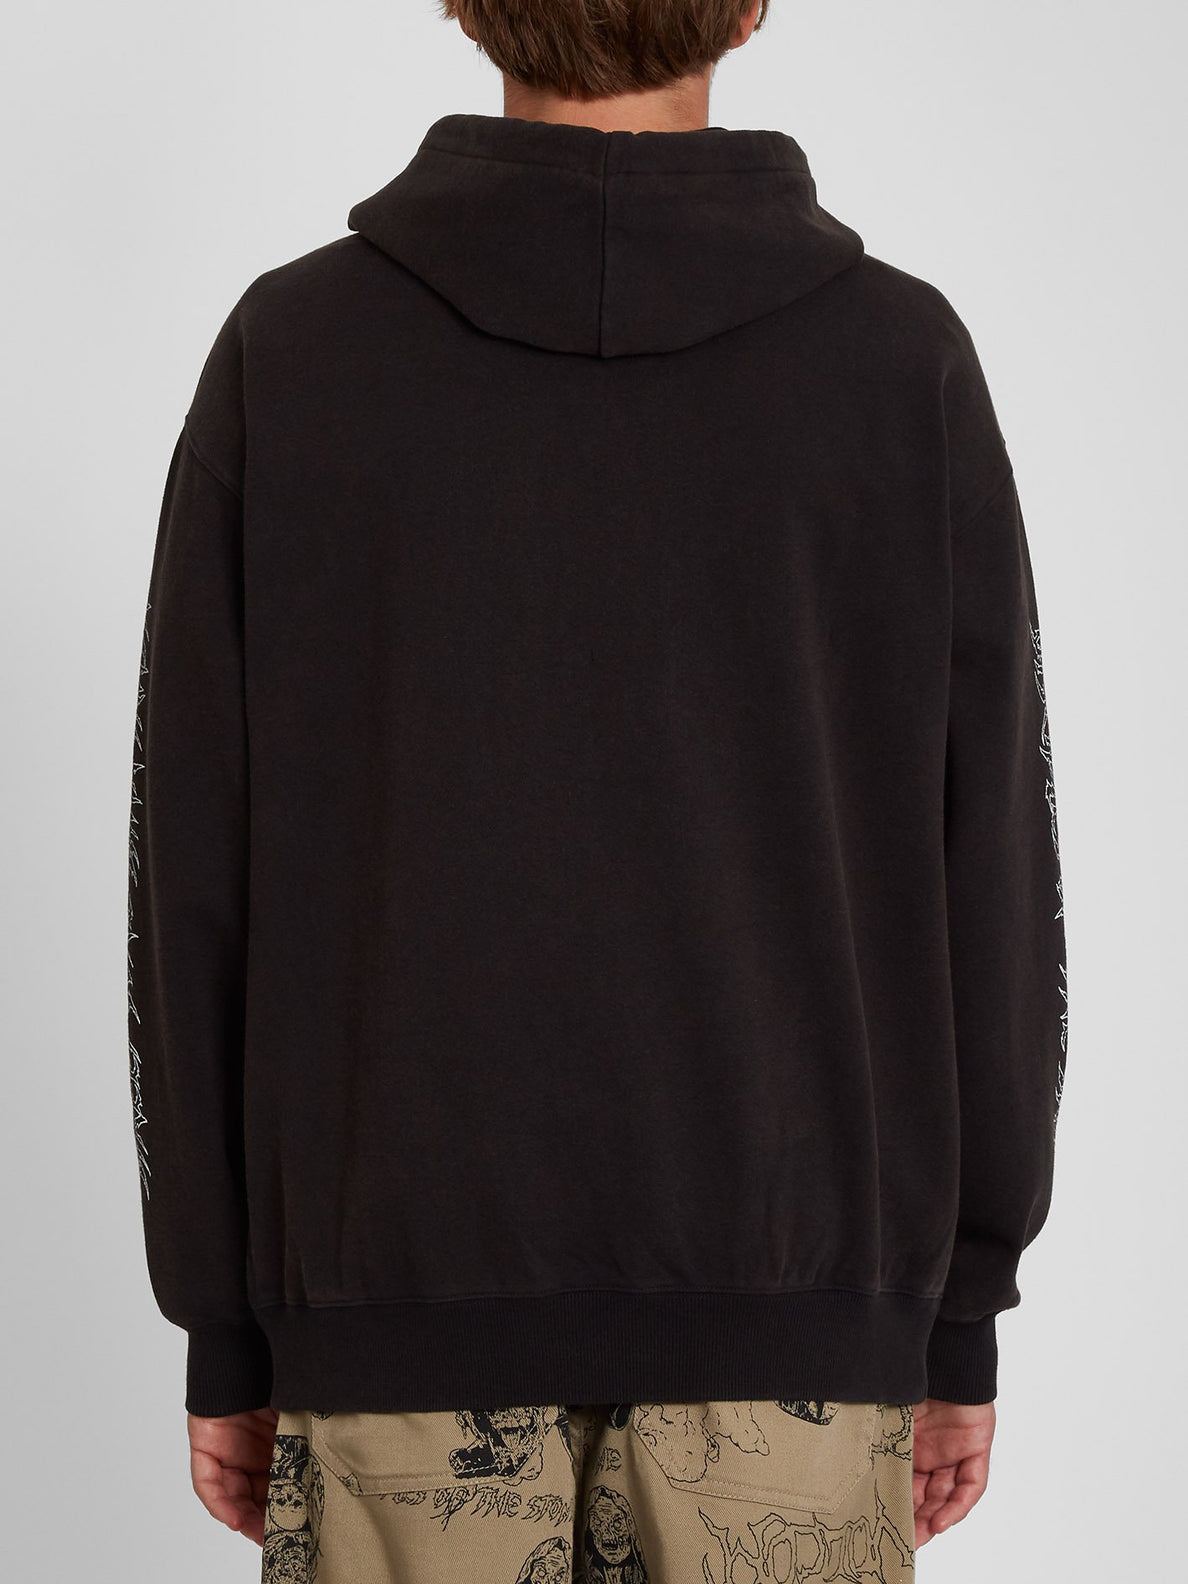 Something Out There Hoodie - BLACK (A4142004_BLK) [B]